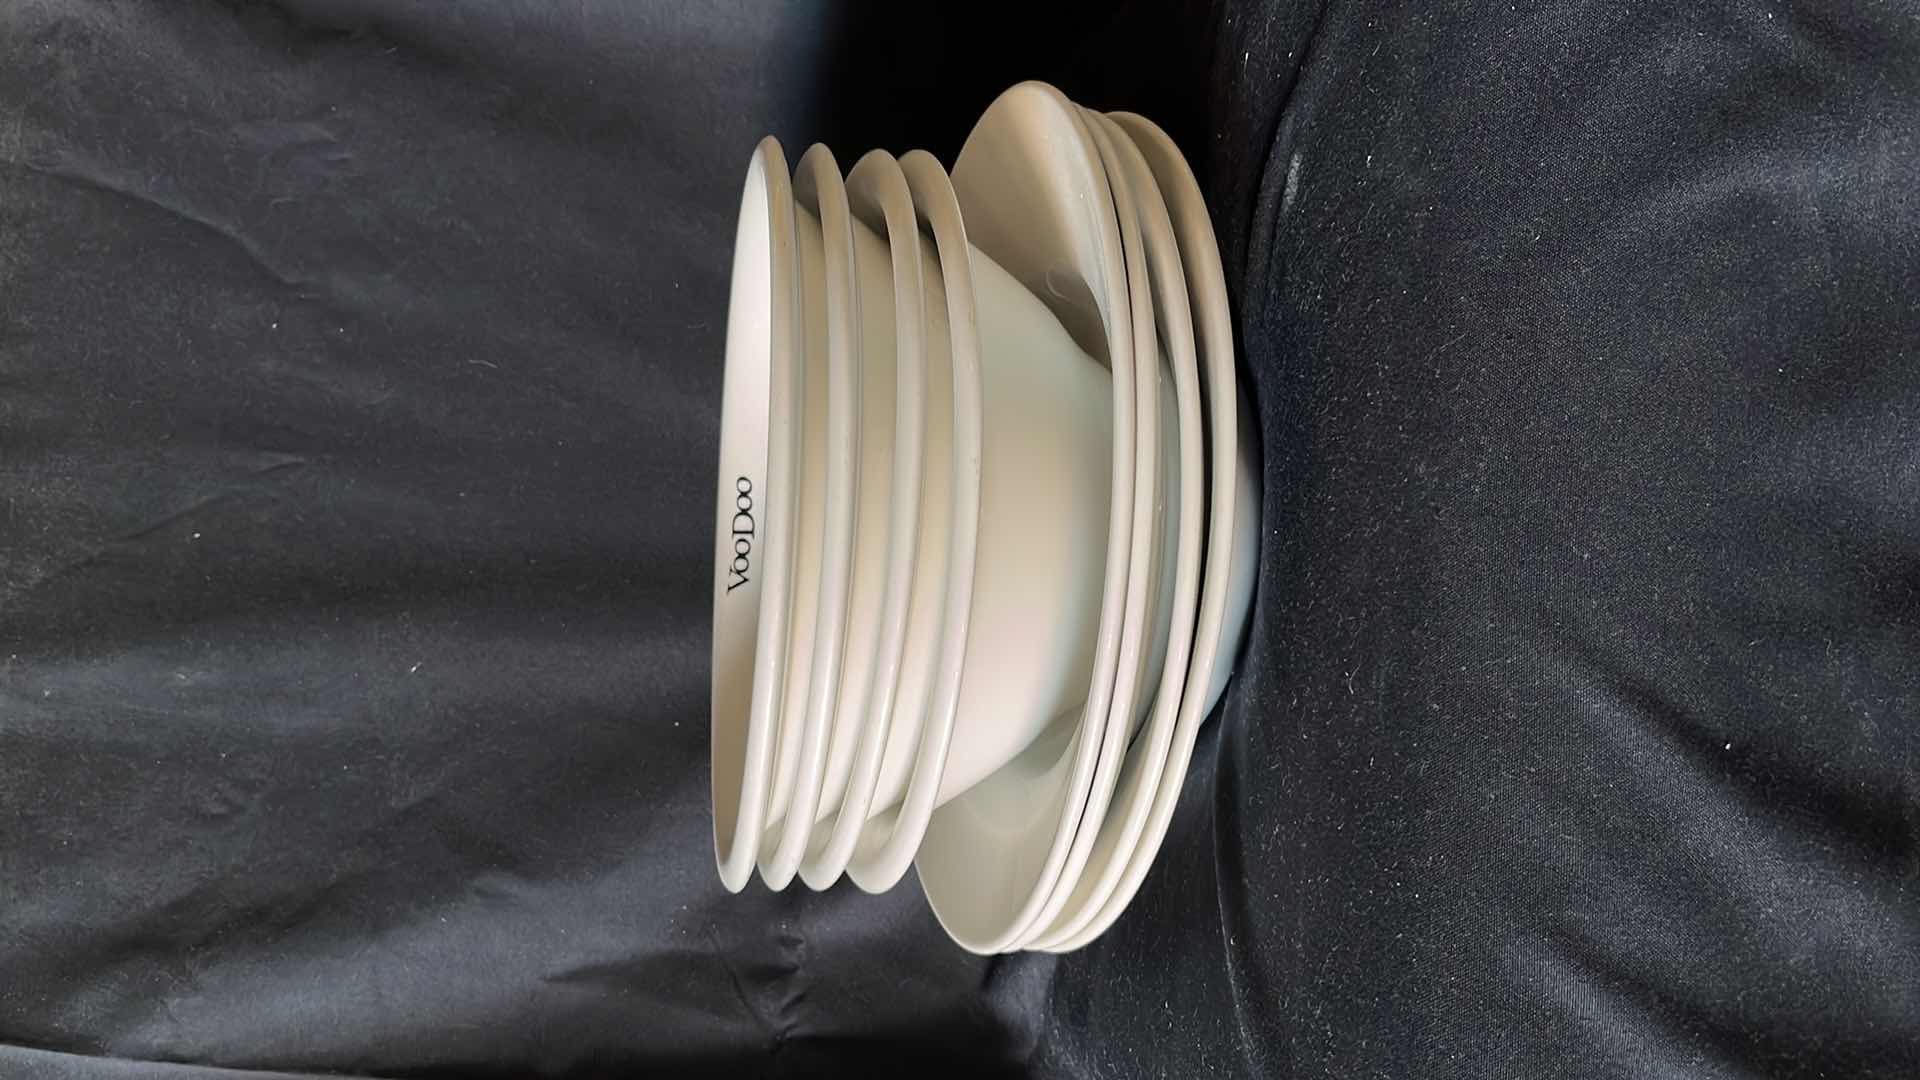 Photo 1 of DUDSON FINEST VOODOO SERVING BOWLS AND SERVING PLATES (SETS OF 4)